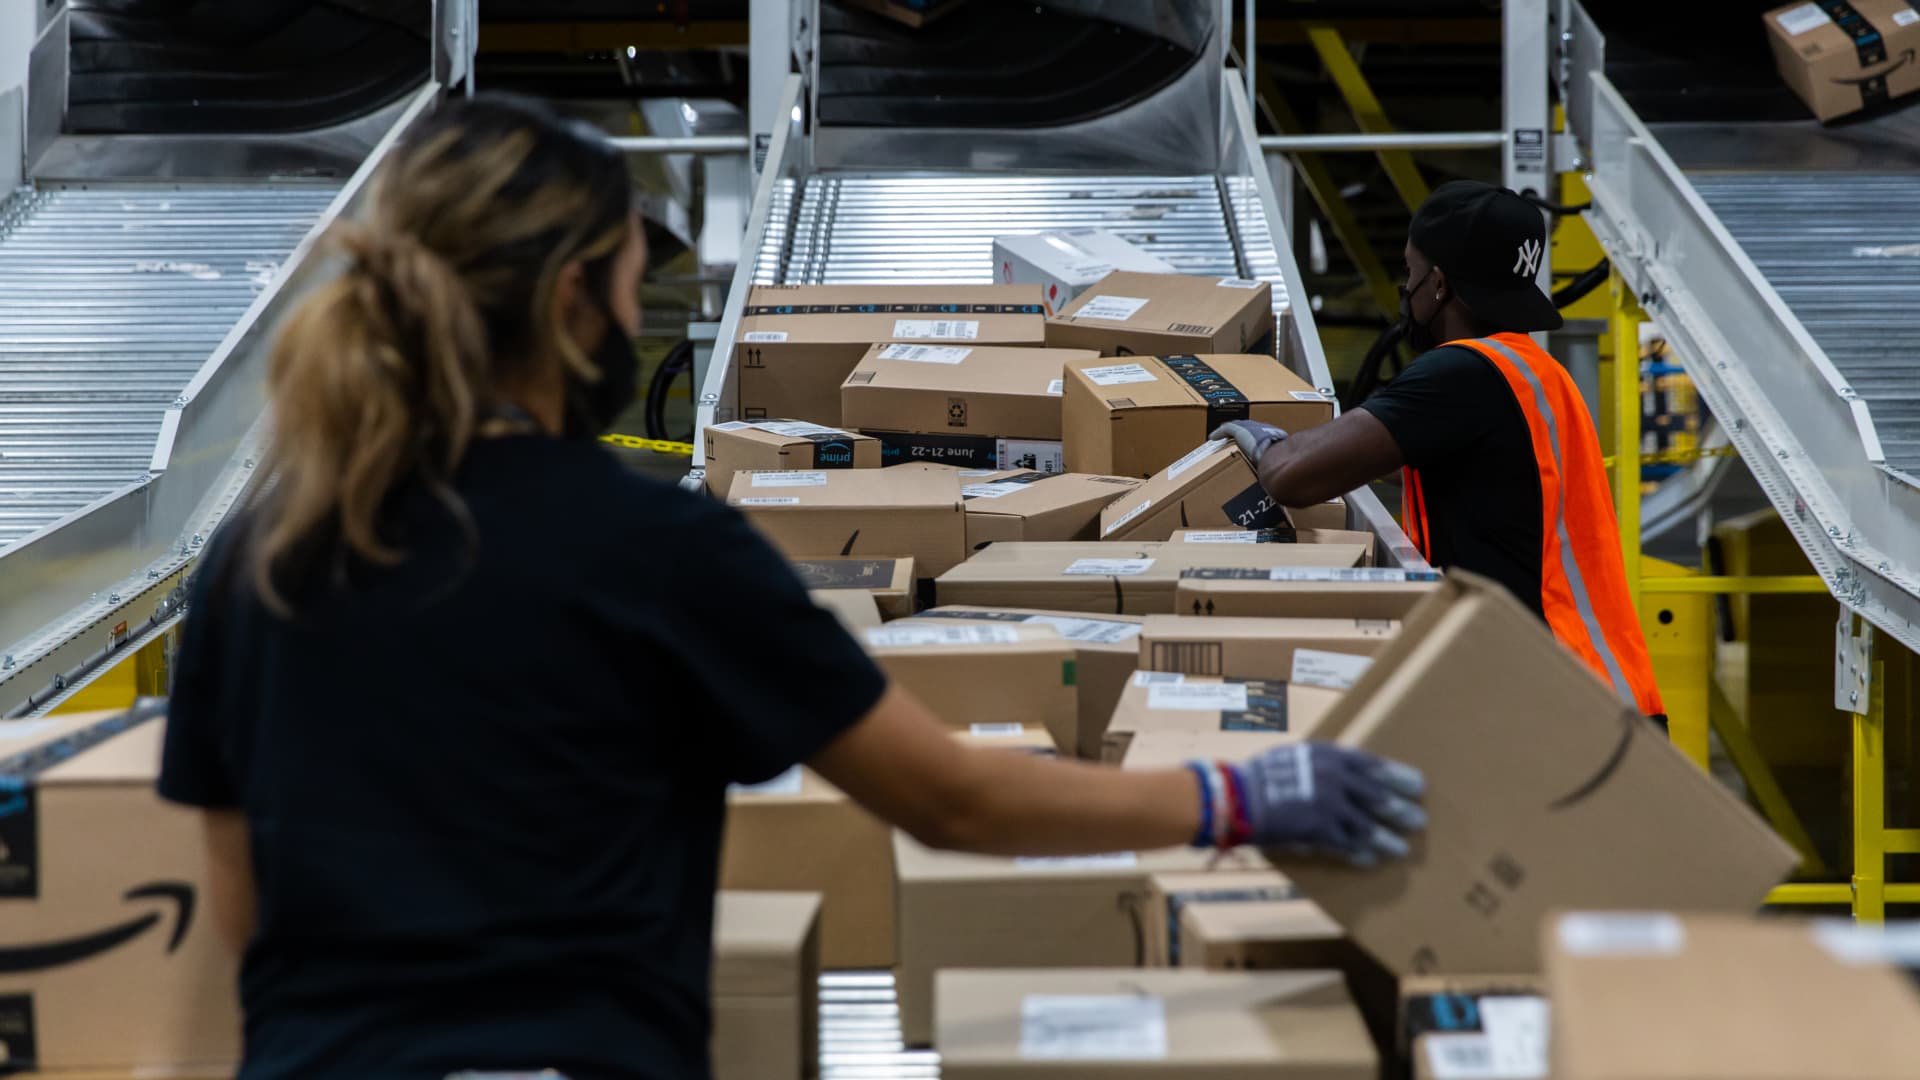 Amazon's second Prime Day sale will take place Oct. 11-12